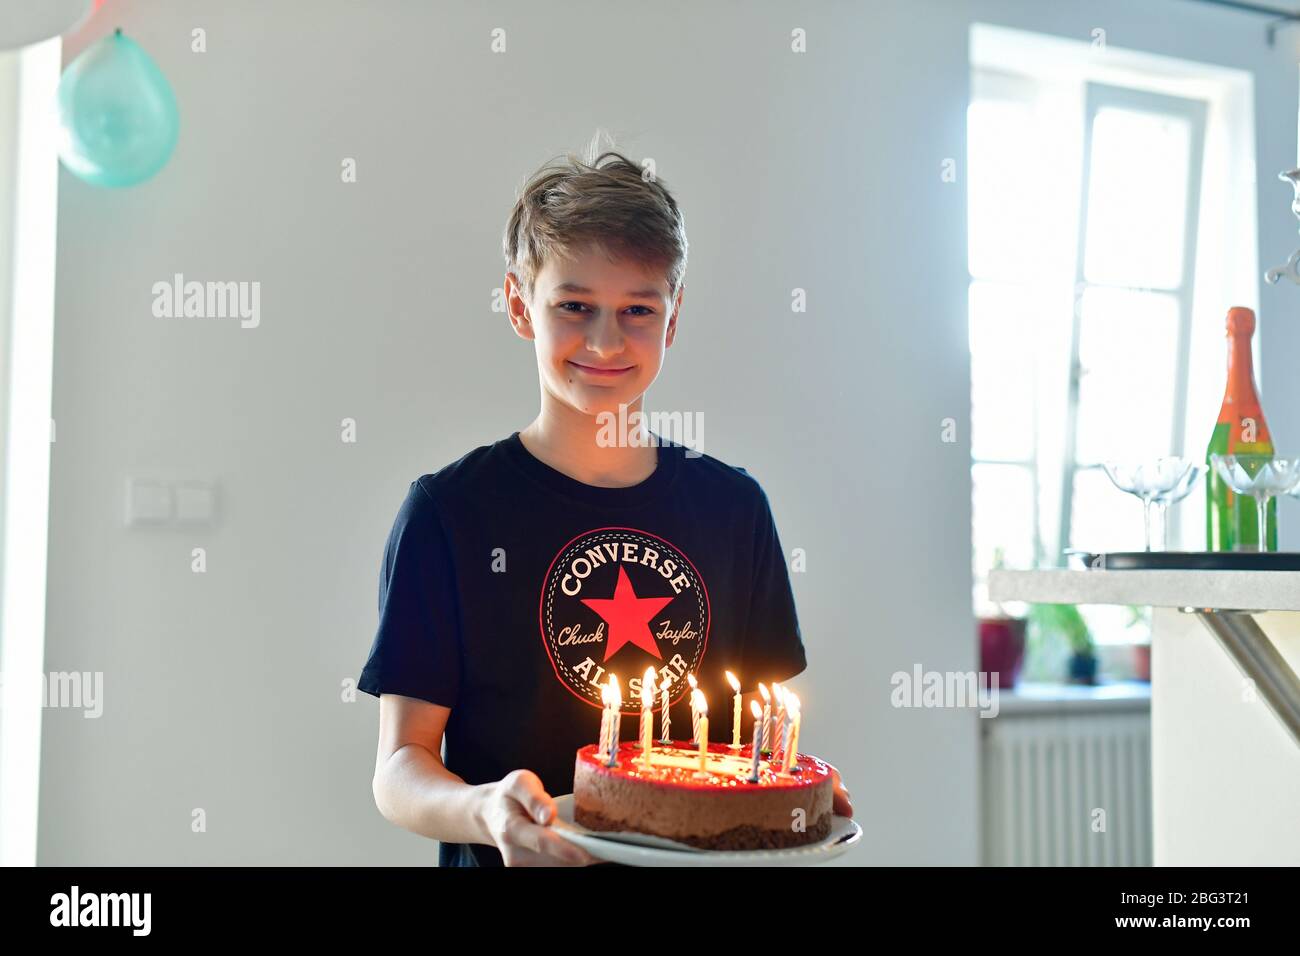 home birthday family celebration of youngster Stock Photo